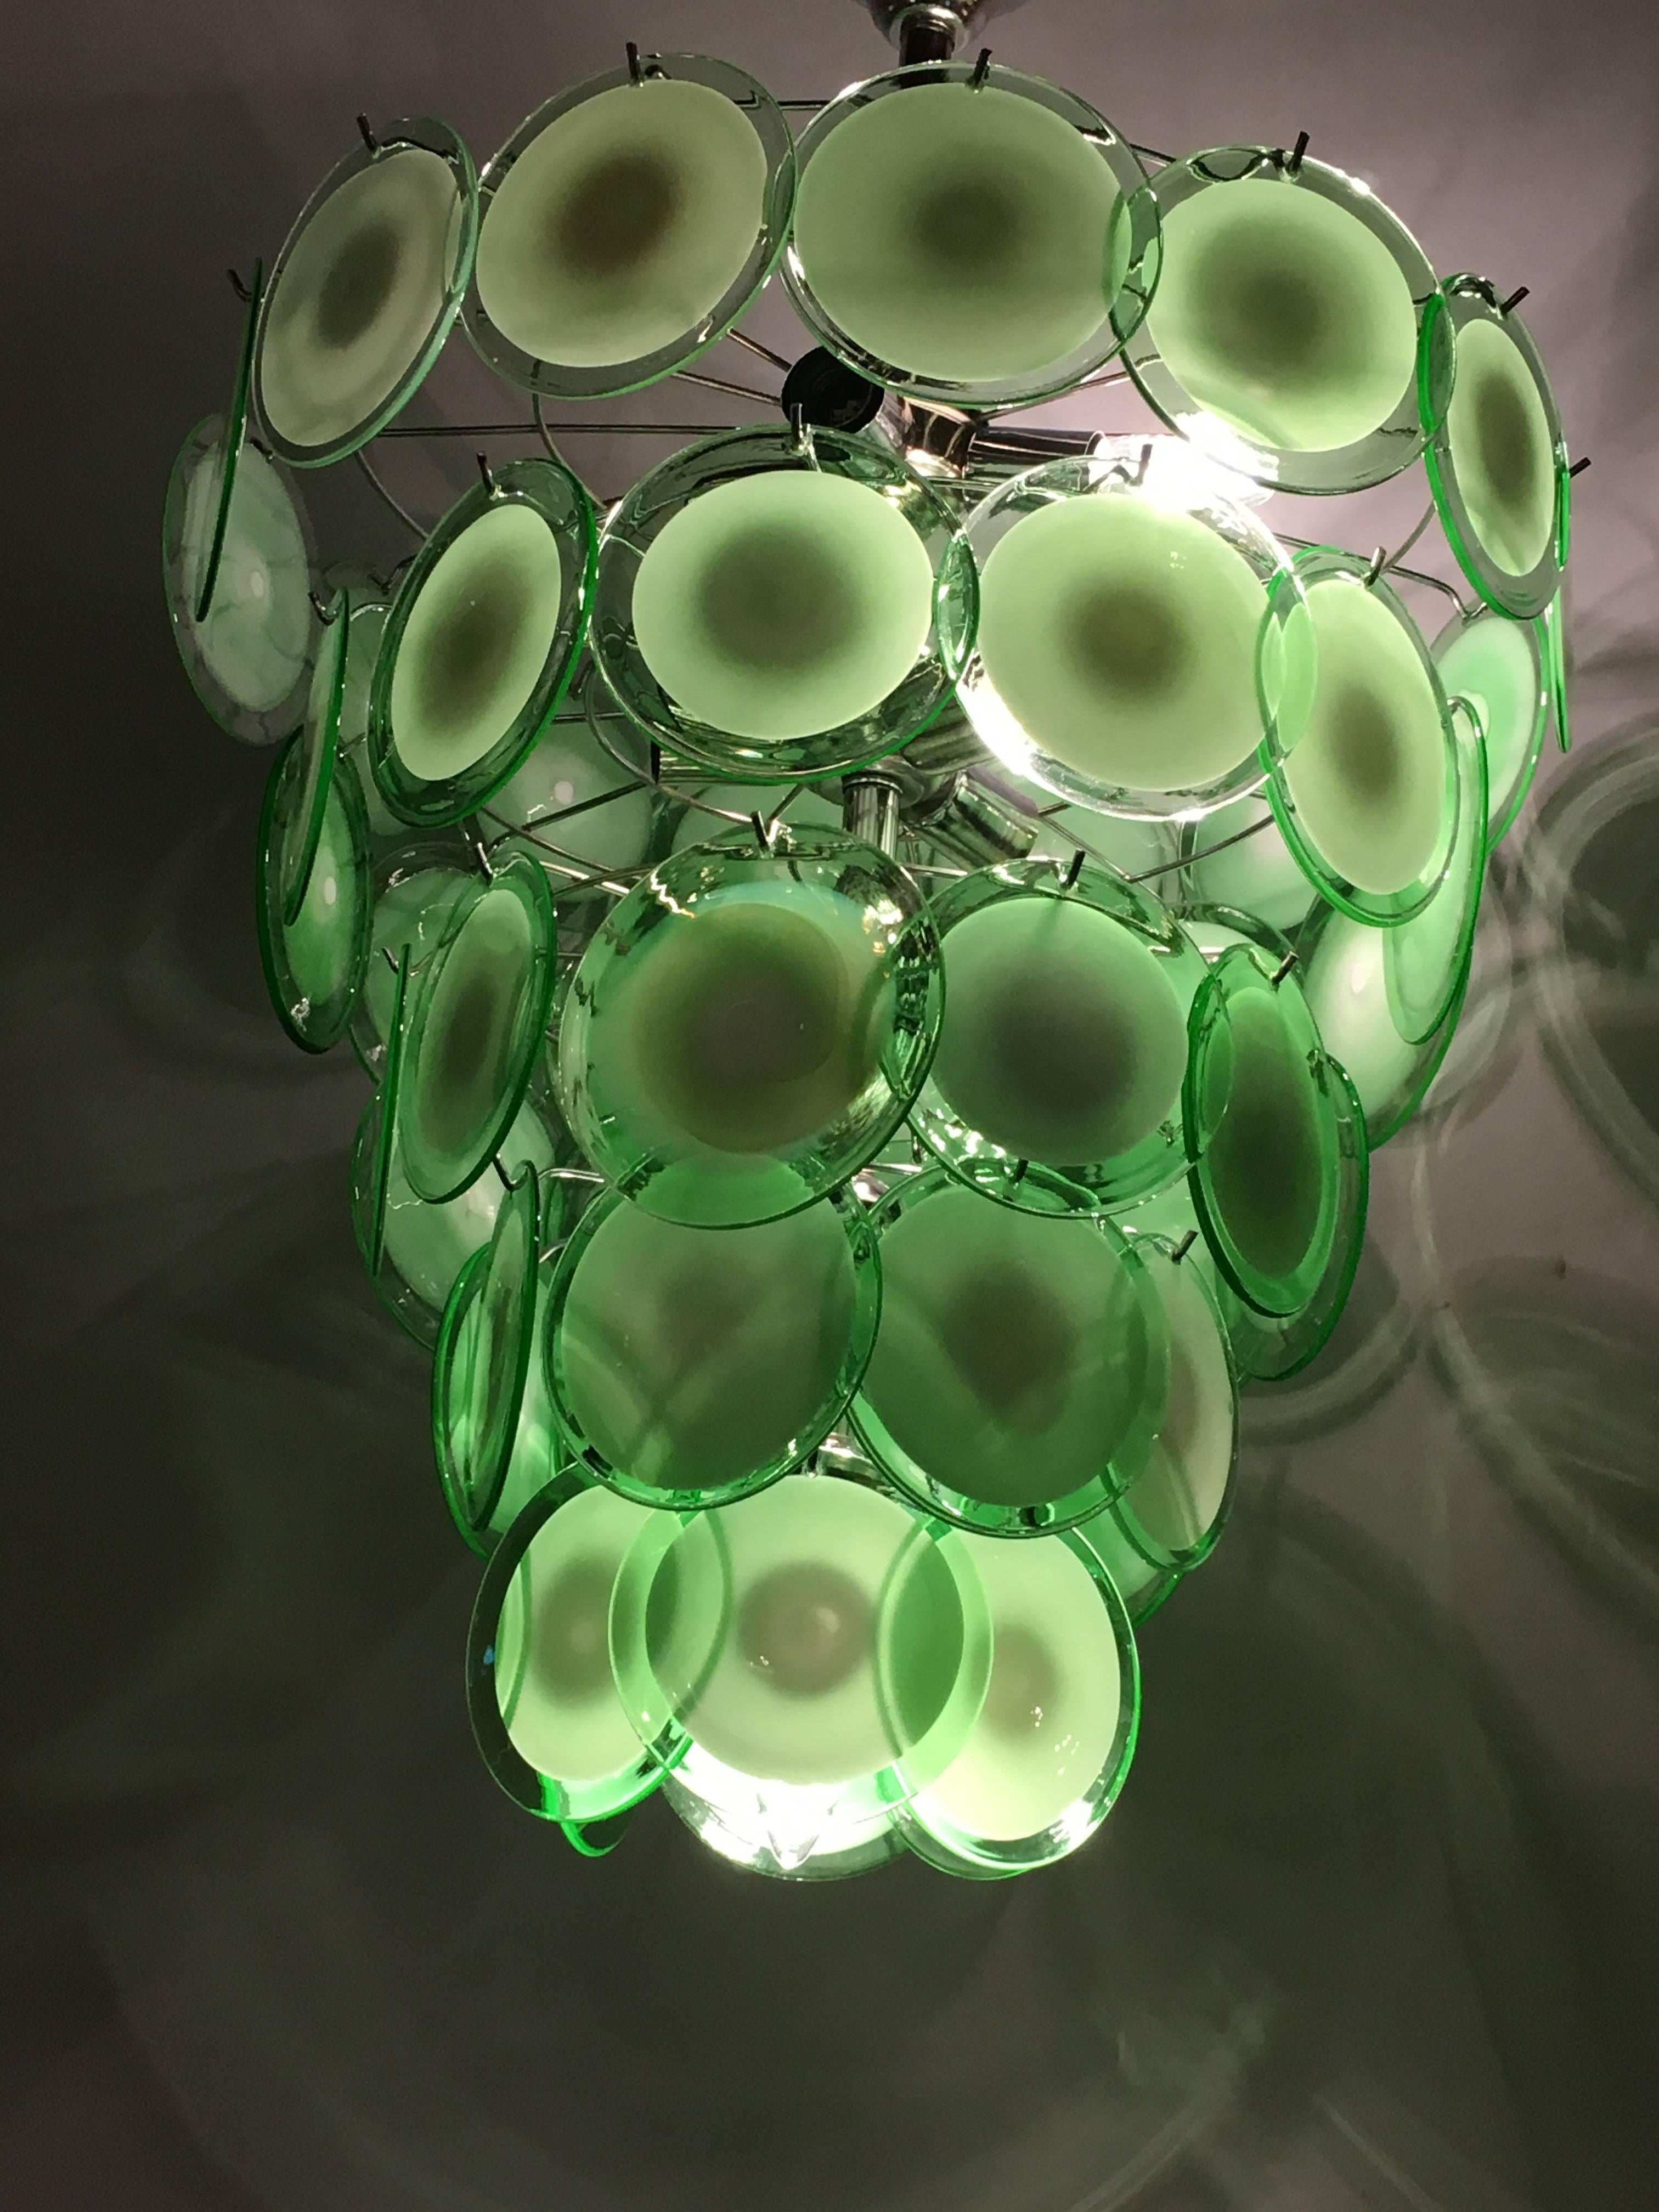 A pair of art deco style circular Murano glass sphere chandeliers. Each having fifty circular Murano glass spheres approximately six inches in diameter. This pair having mint green and white glass disks. We have recently acquired a warehouse which